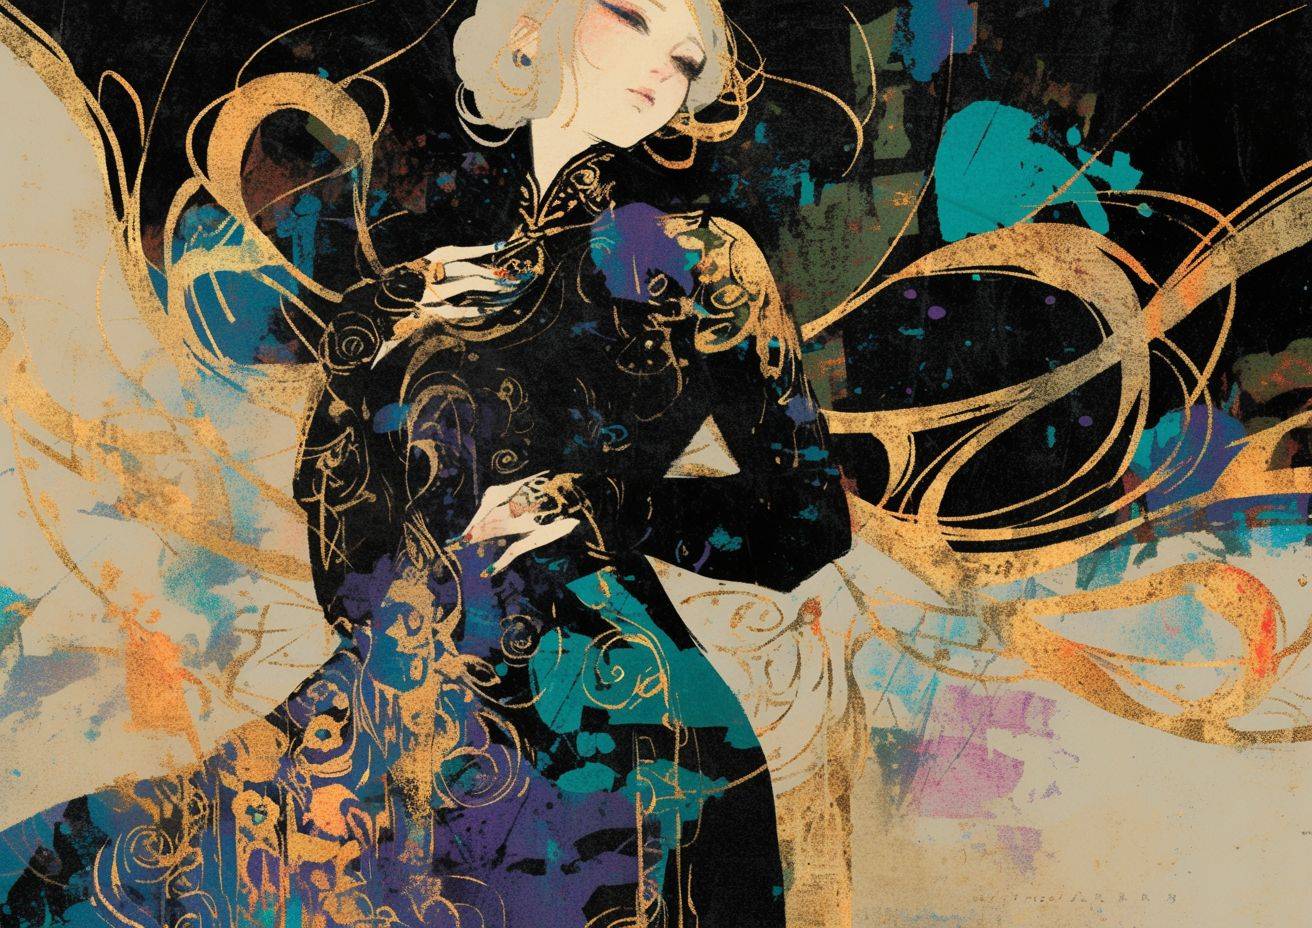 A female Magus wearing a cheongsam, color pencil, vintage aquarelle, collage effects, dabbed brushstrokes, light outlines, black background, strong visual flow